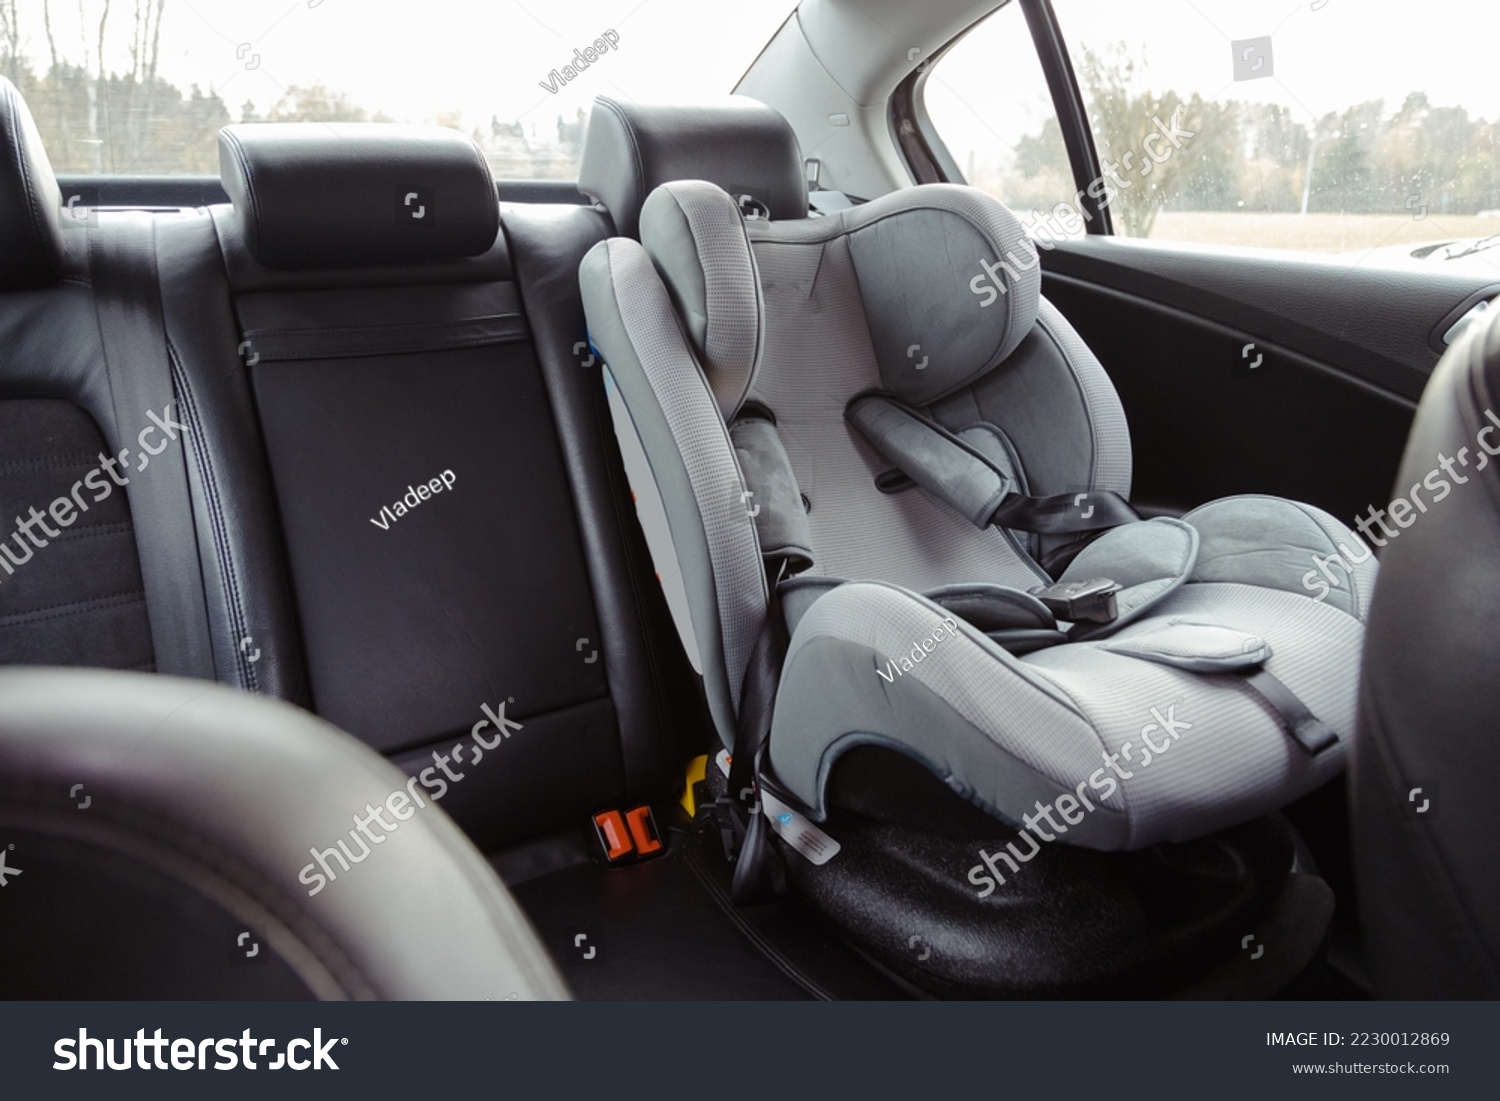 Child car seat for safety in the rear passenger seat of a car. #2230012869